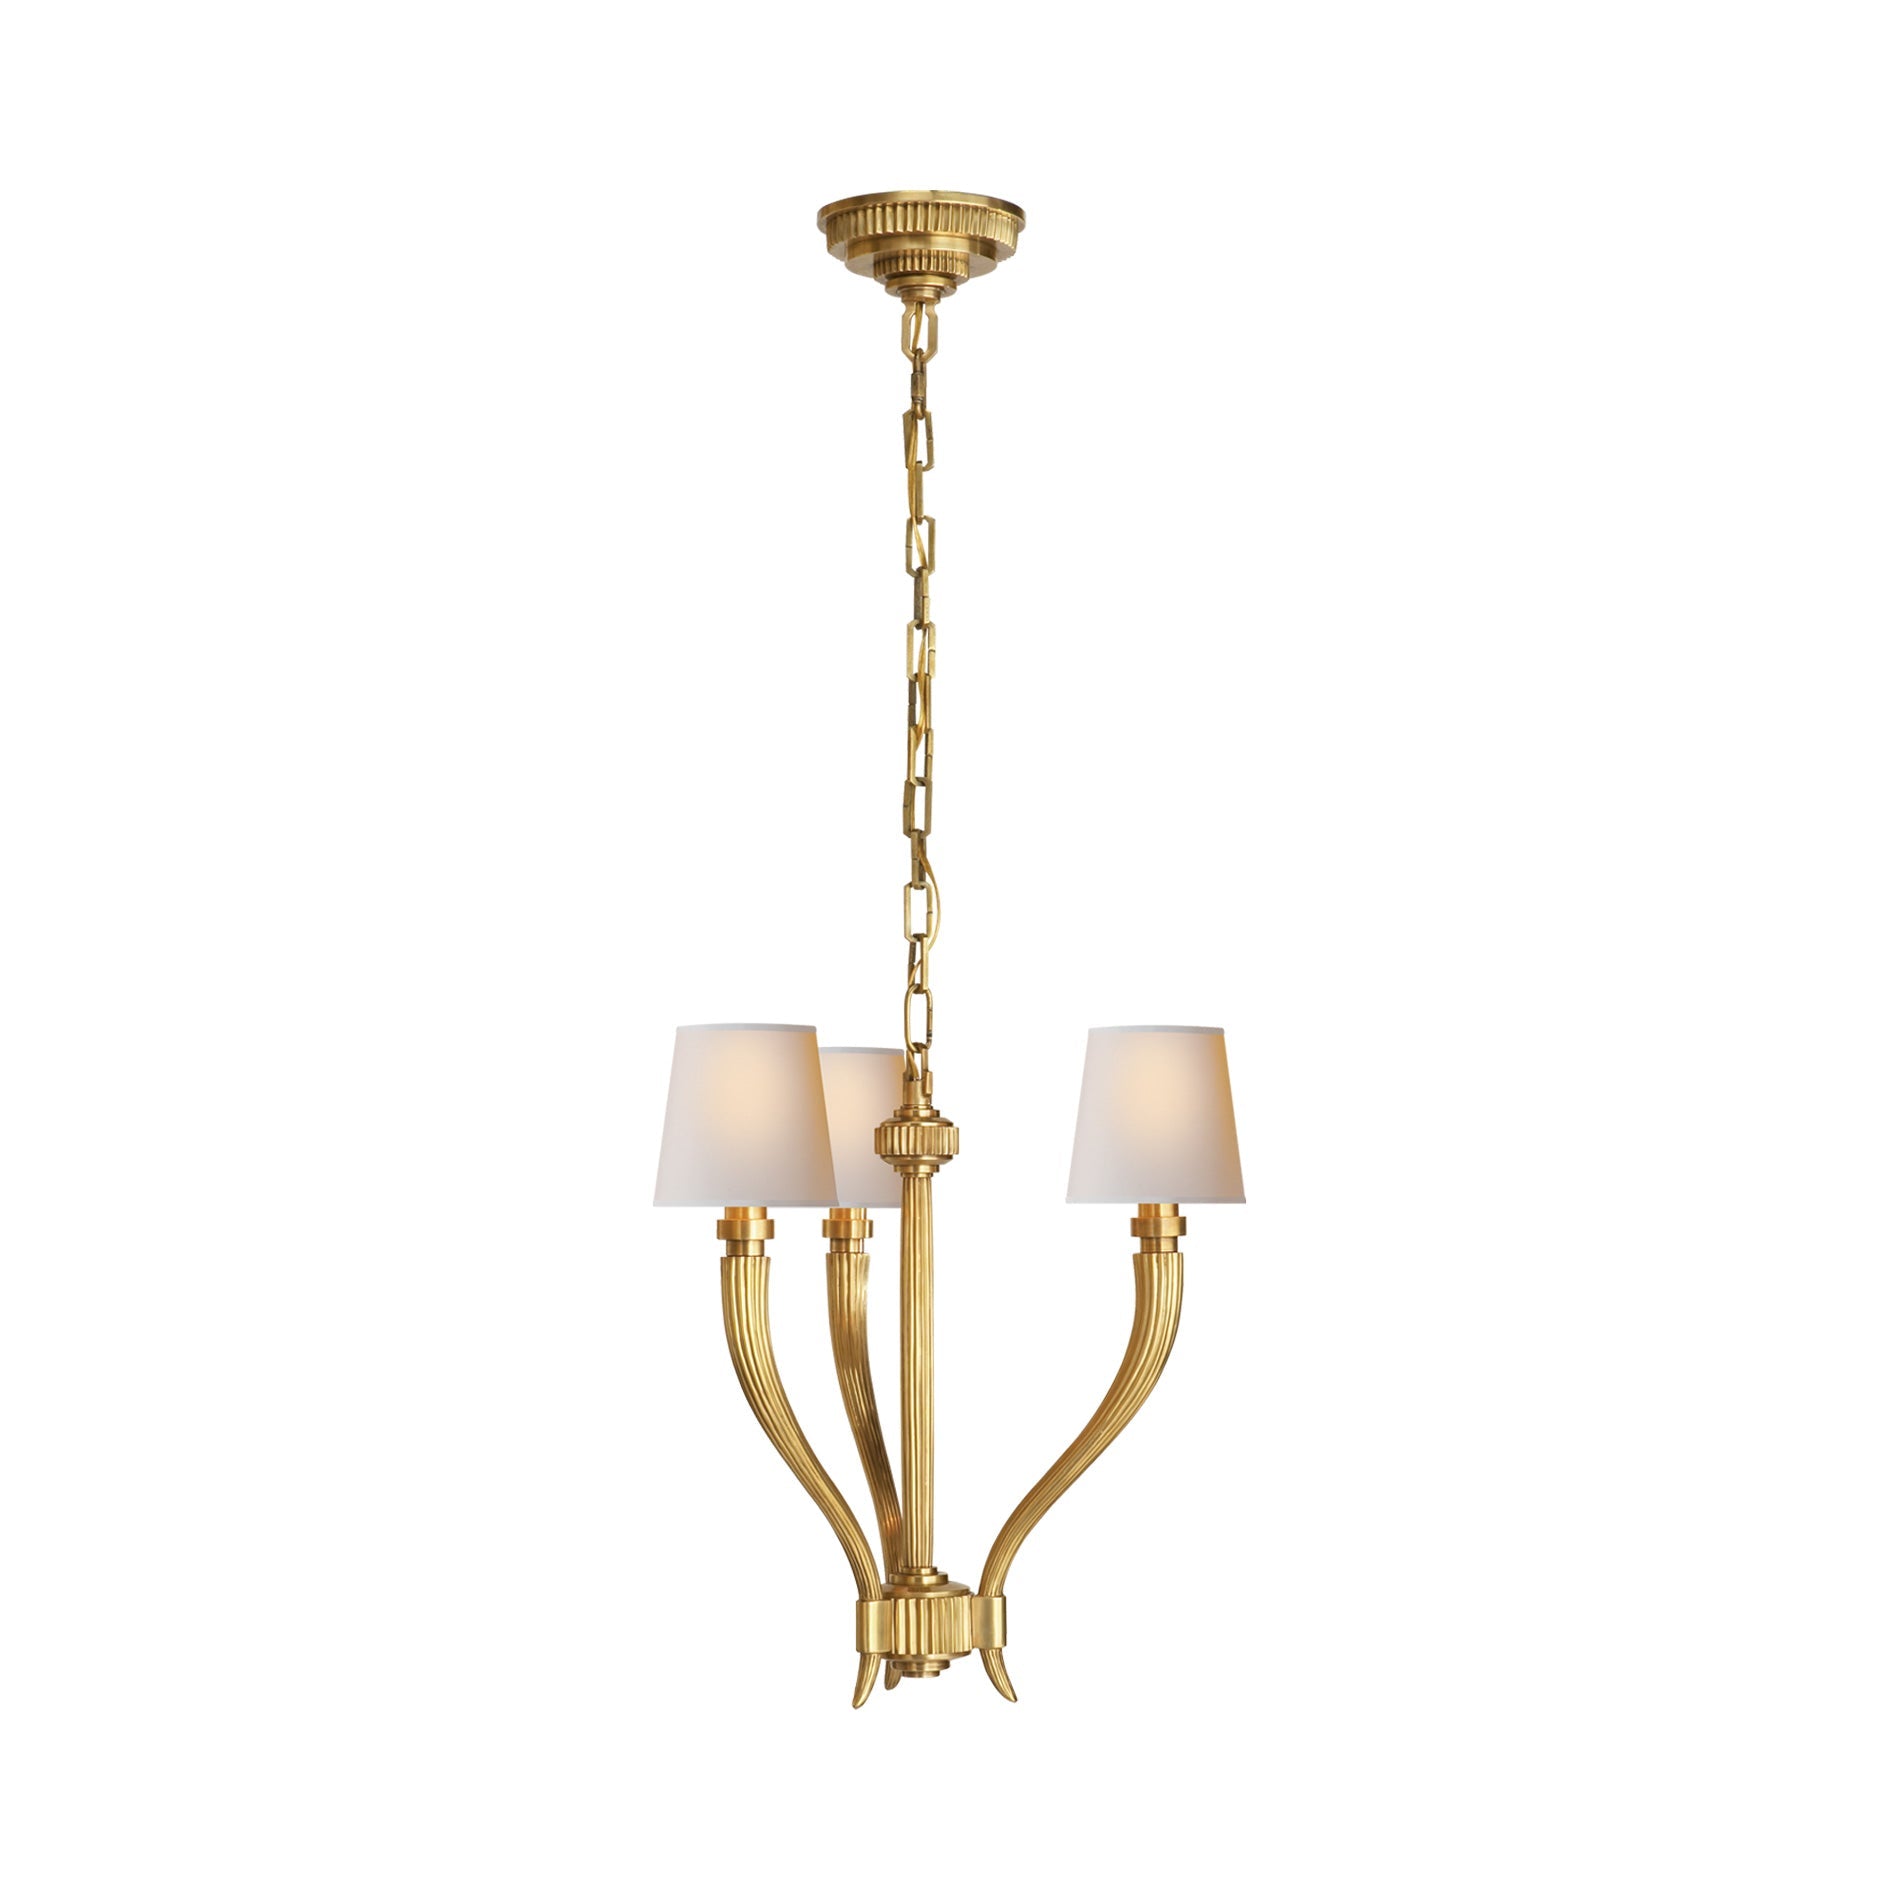 E.F. Chapman Country Industrial Pendant in Brass by Visual Comfort  Signature at Destination Lighting